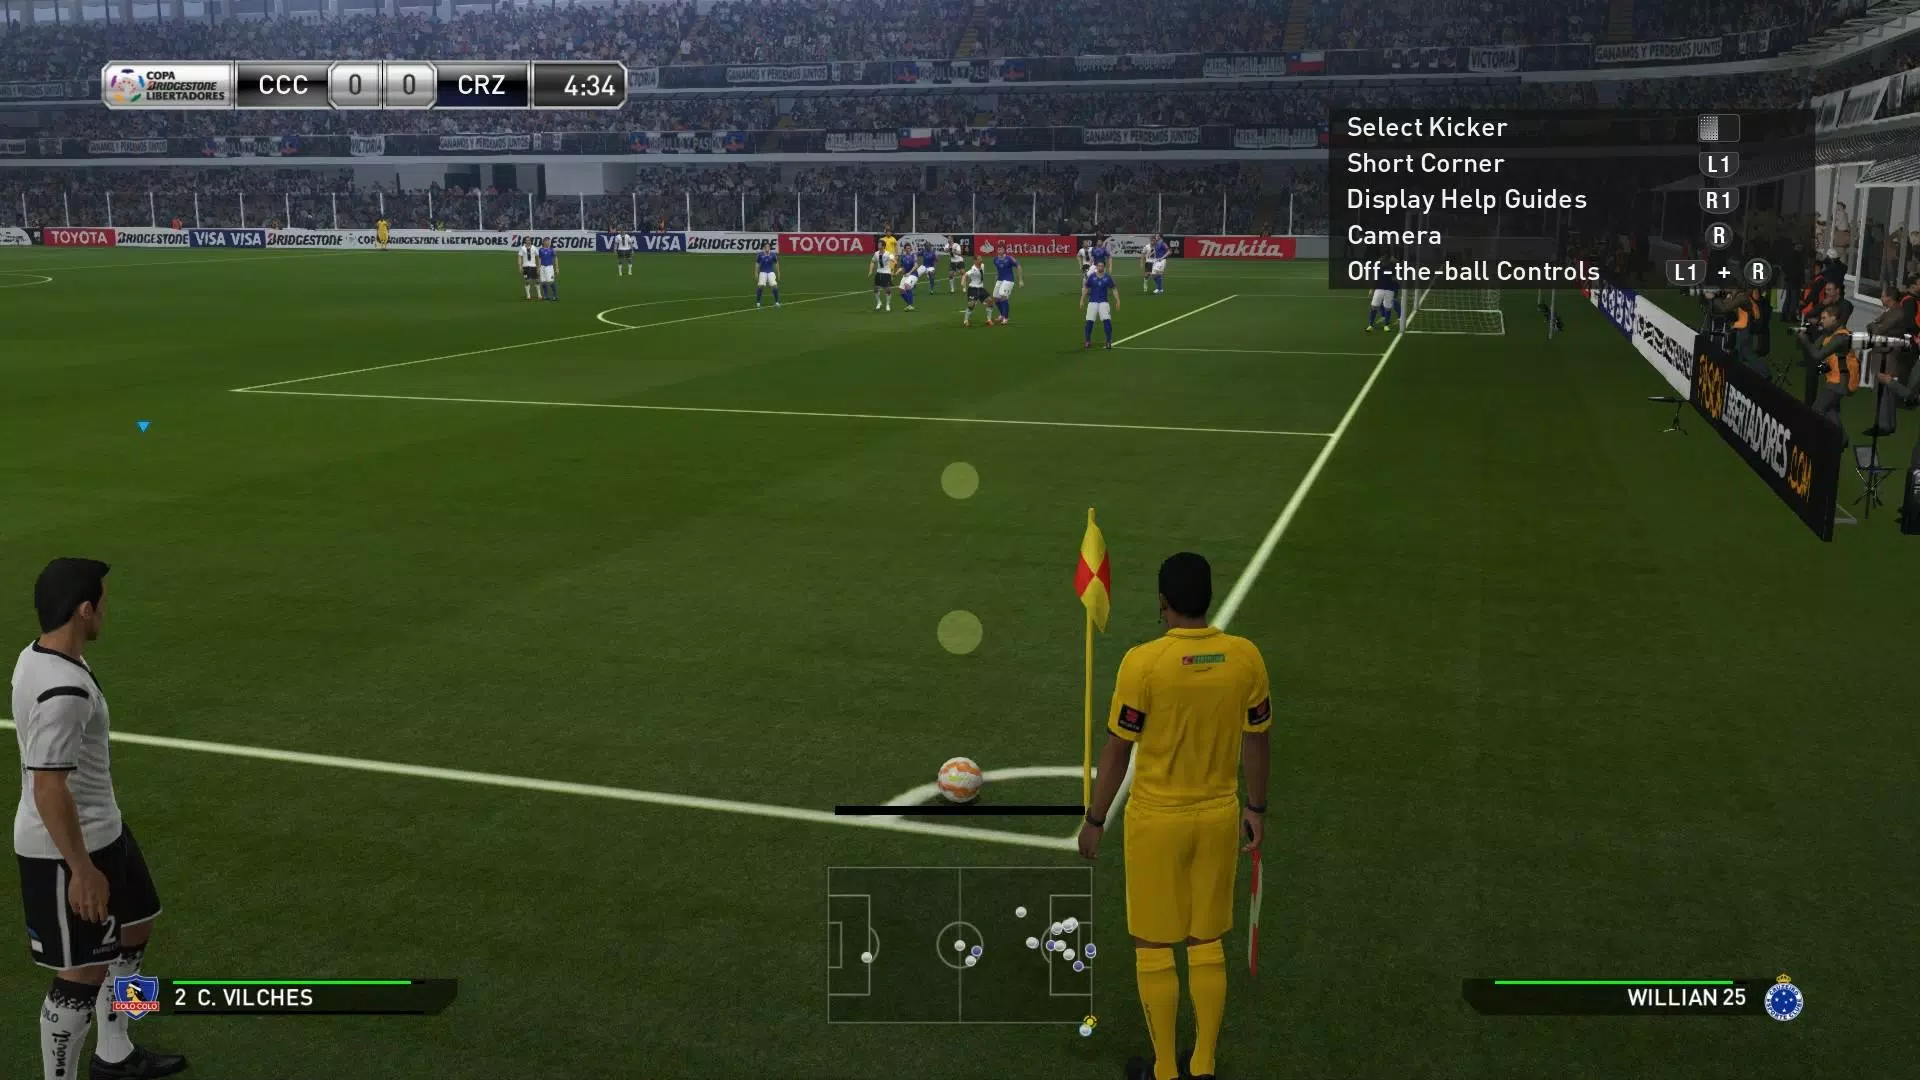 Stream Enjoy PES 2017 Offline with Mod Apk Obb Data Files on Android from  Icconruge